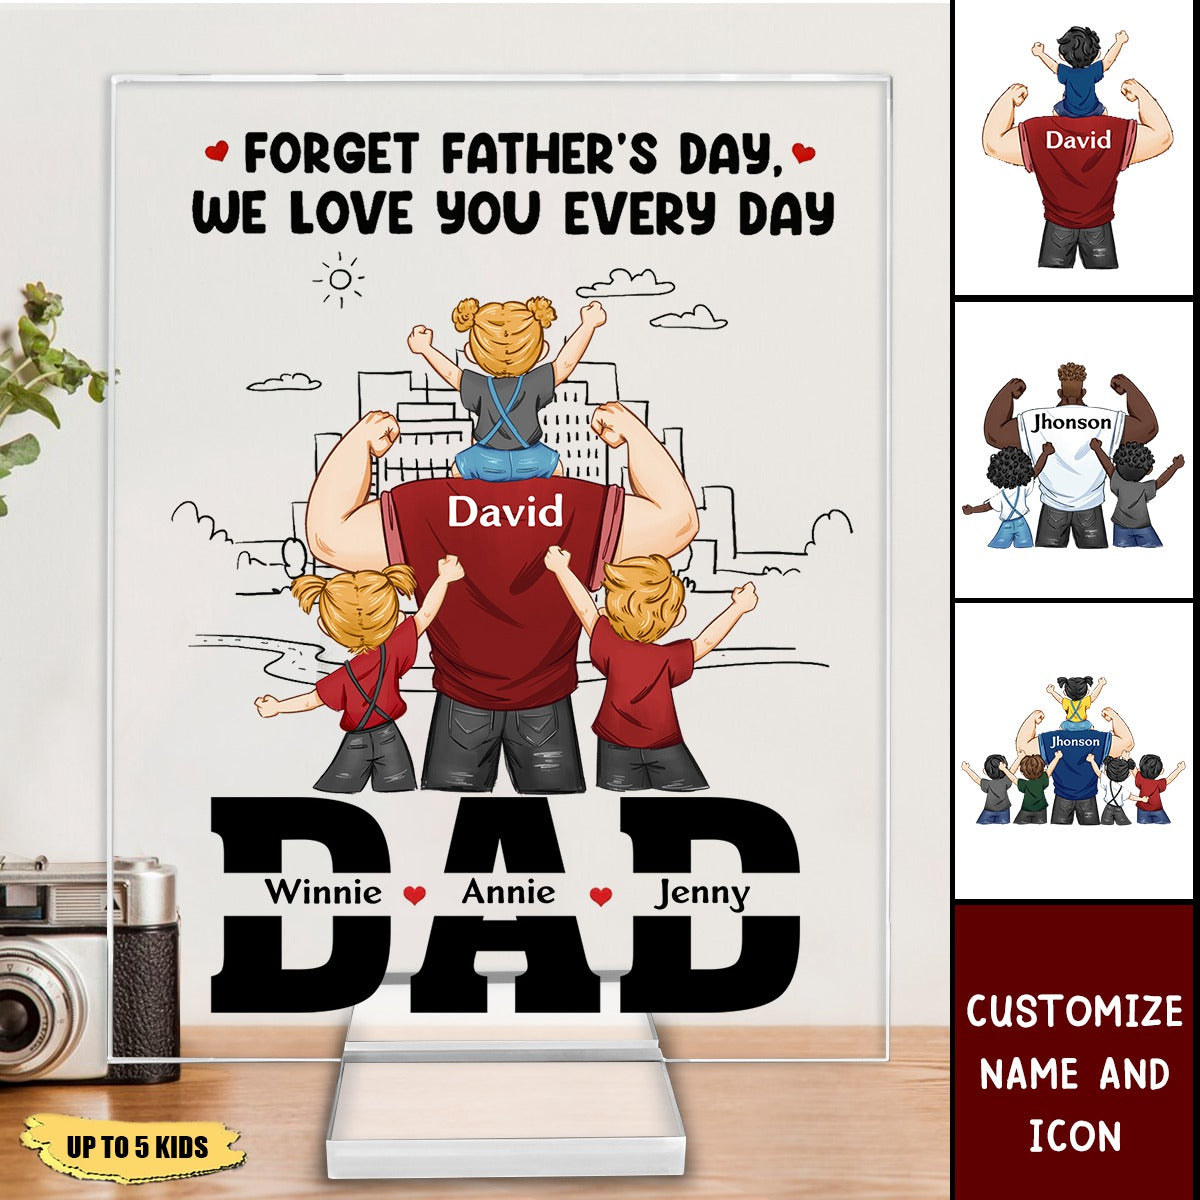 We Love You Everyday, Dad - Personalized Acrylic Plaque